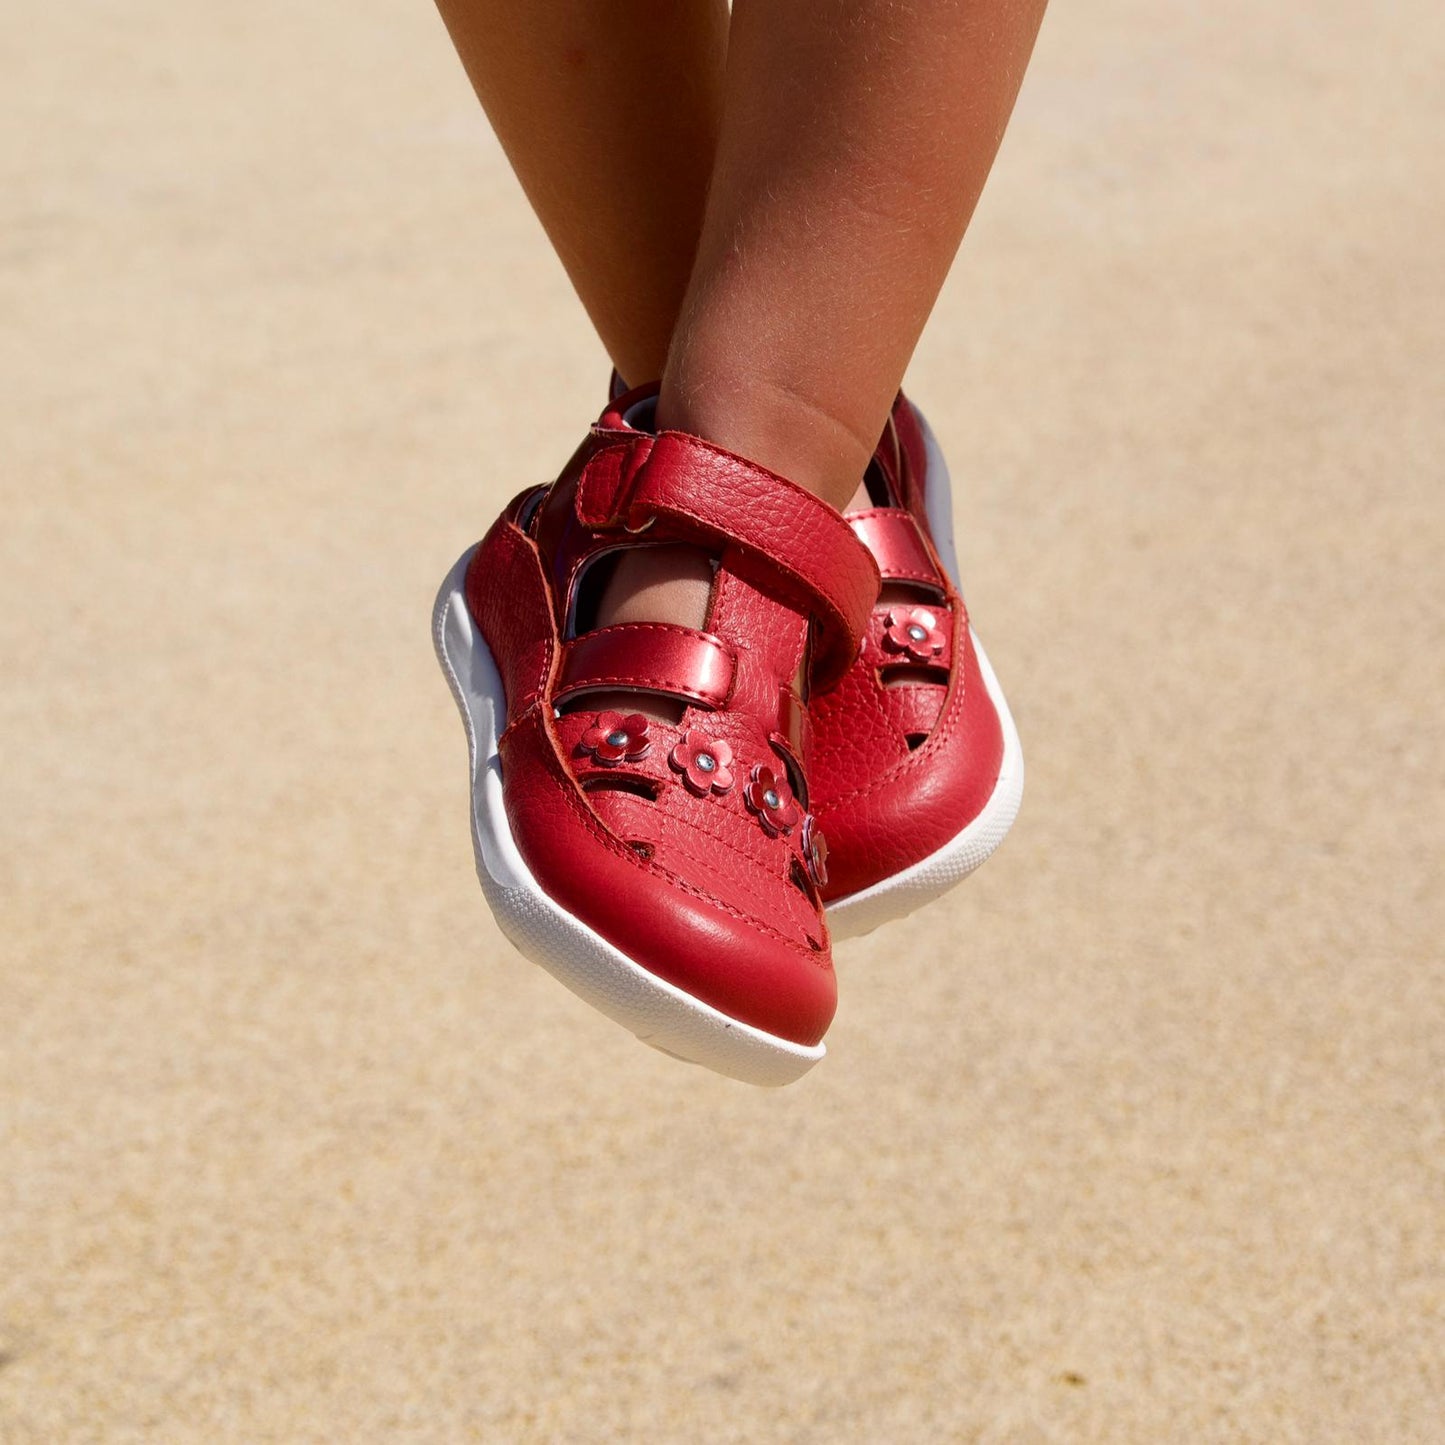 Stylish red sneakers for toddler girls match with every outfit.